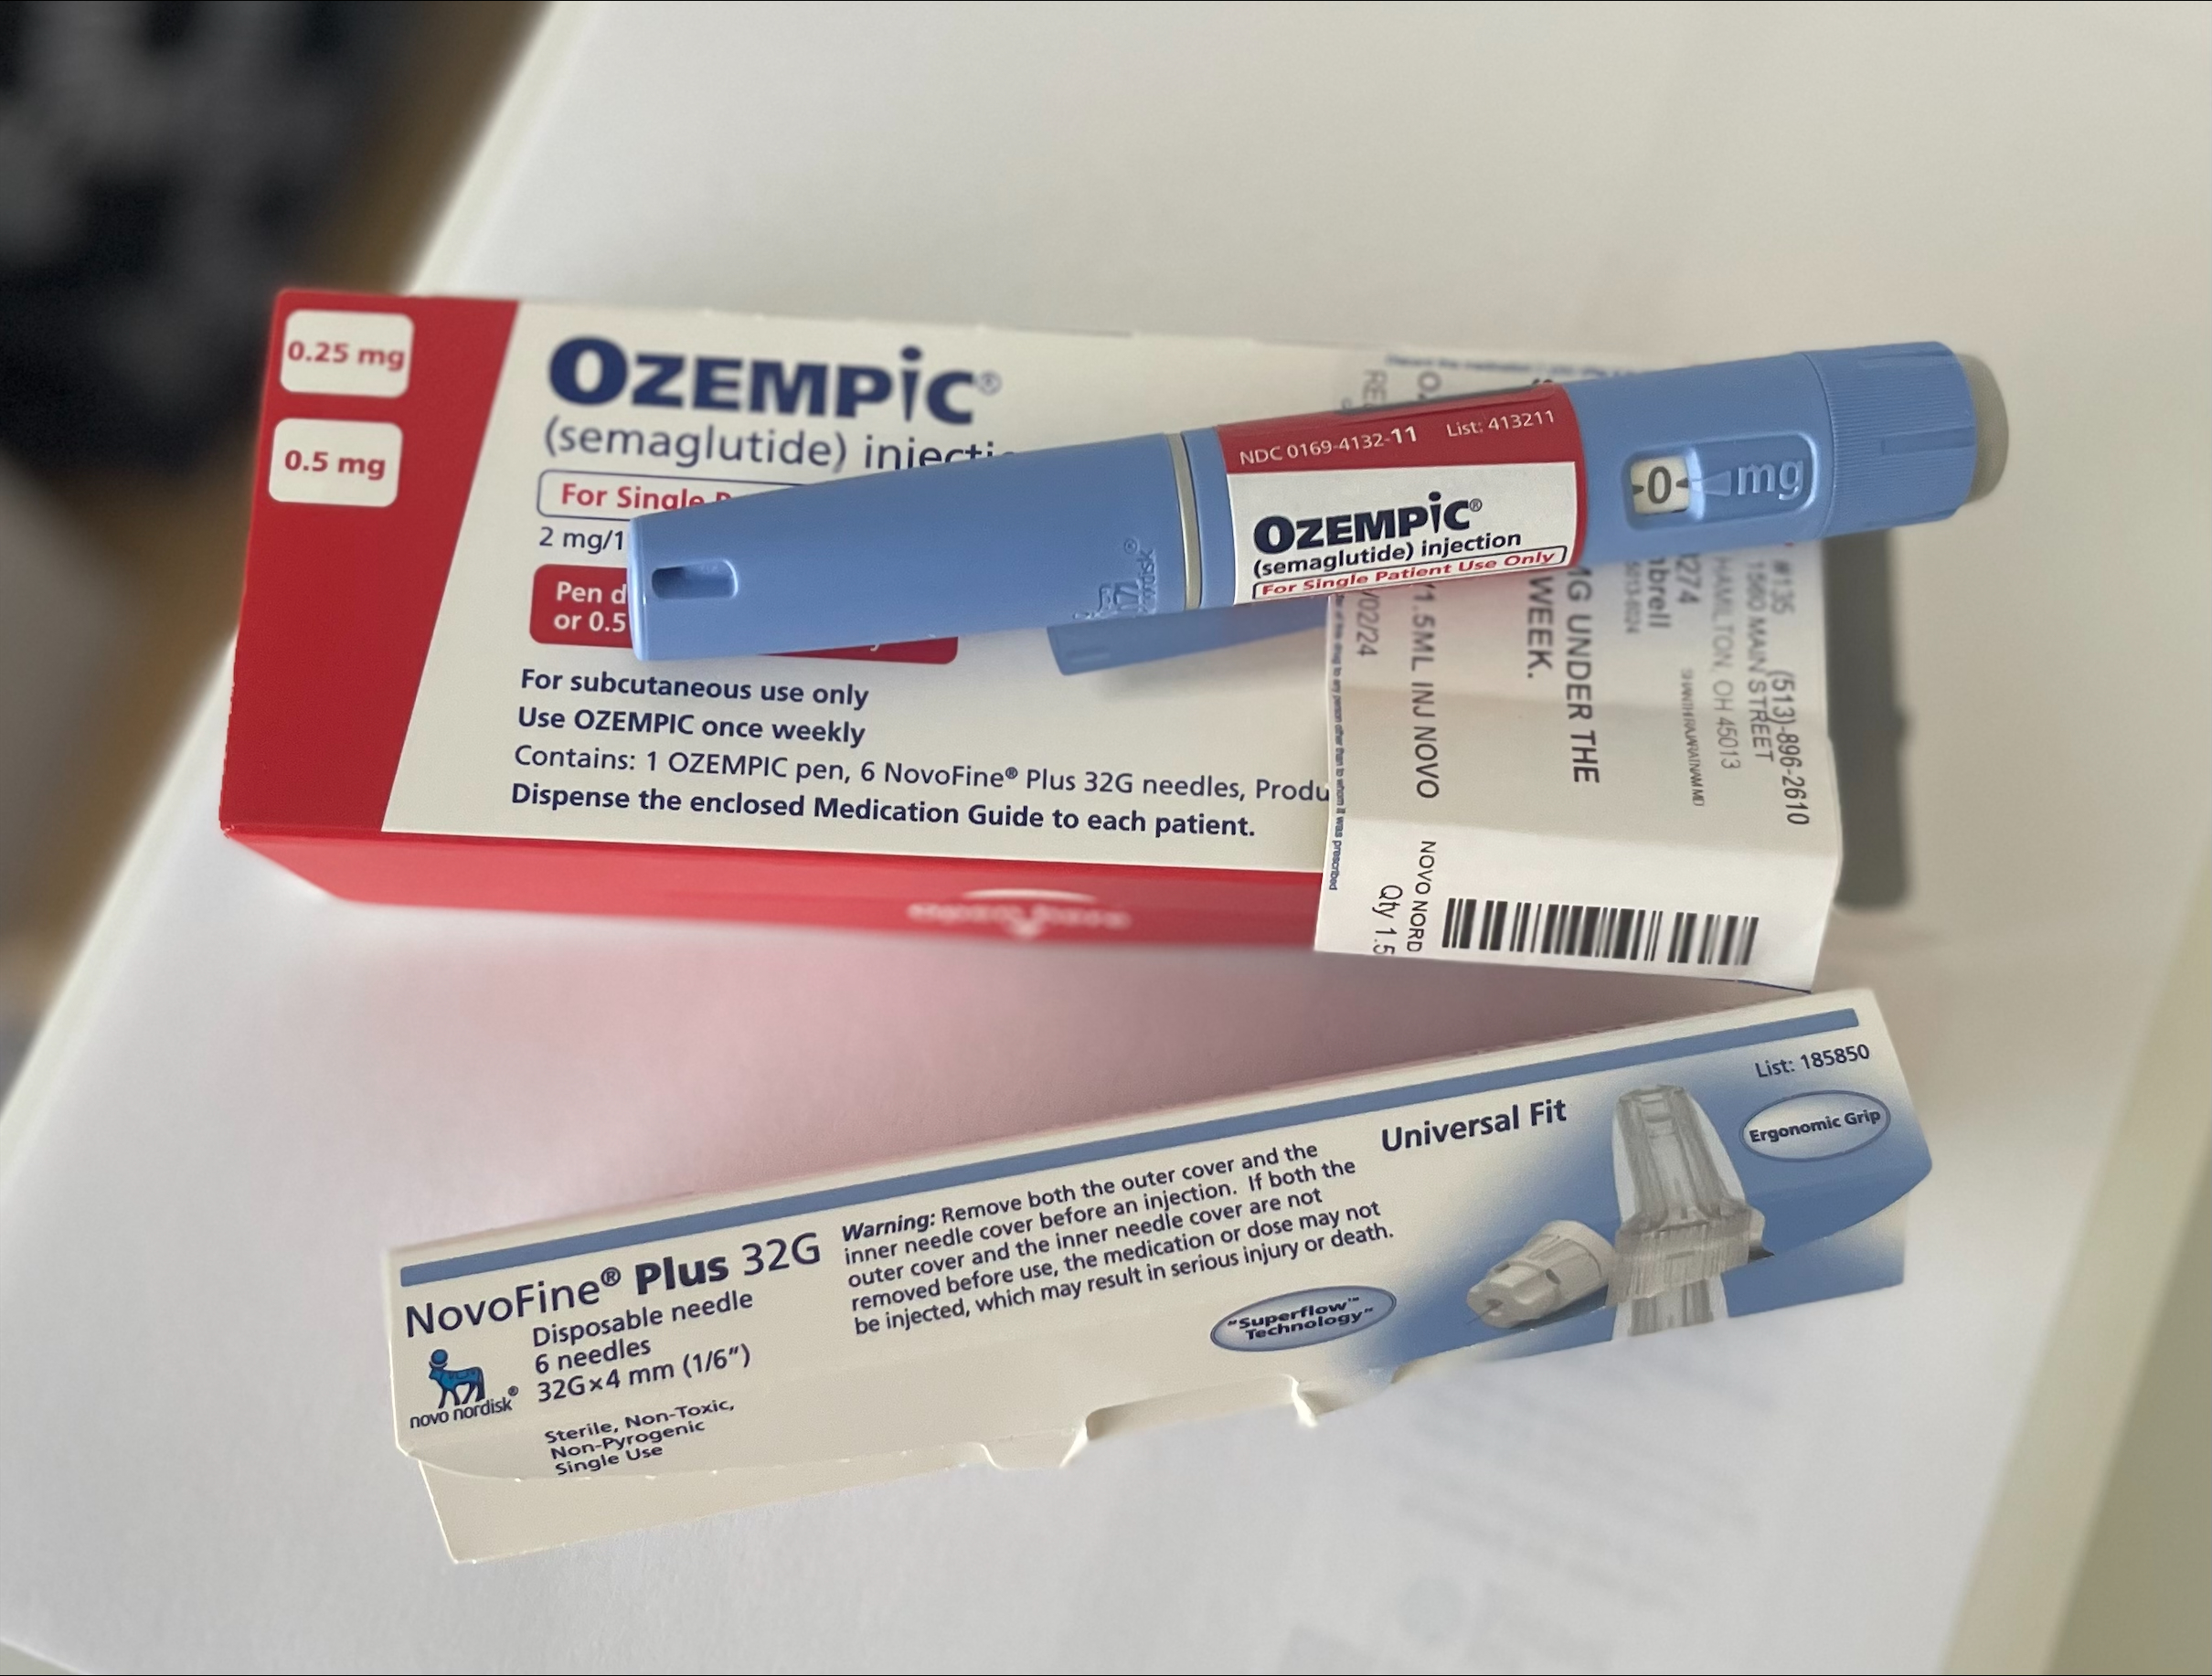 Ozempic shortage: Diabetes drug in demand due to side effect of weight loss